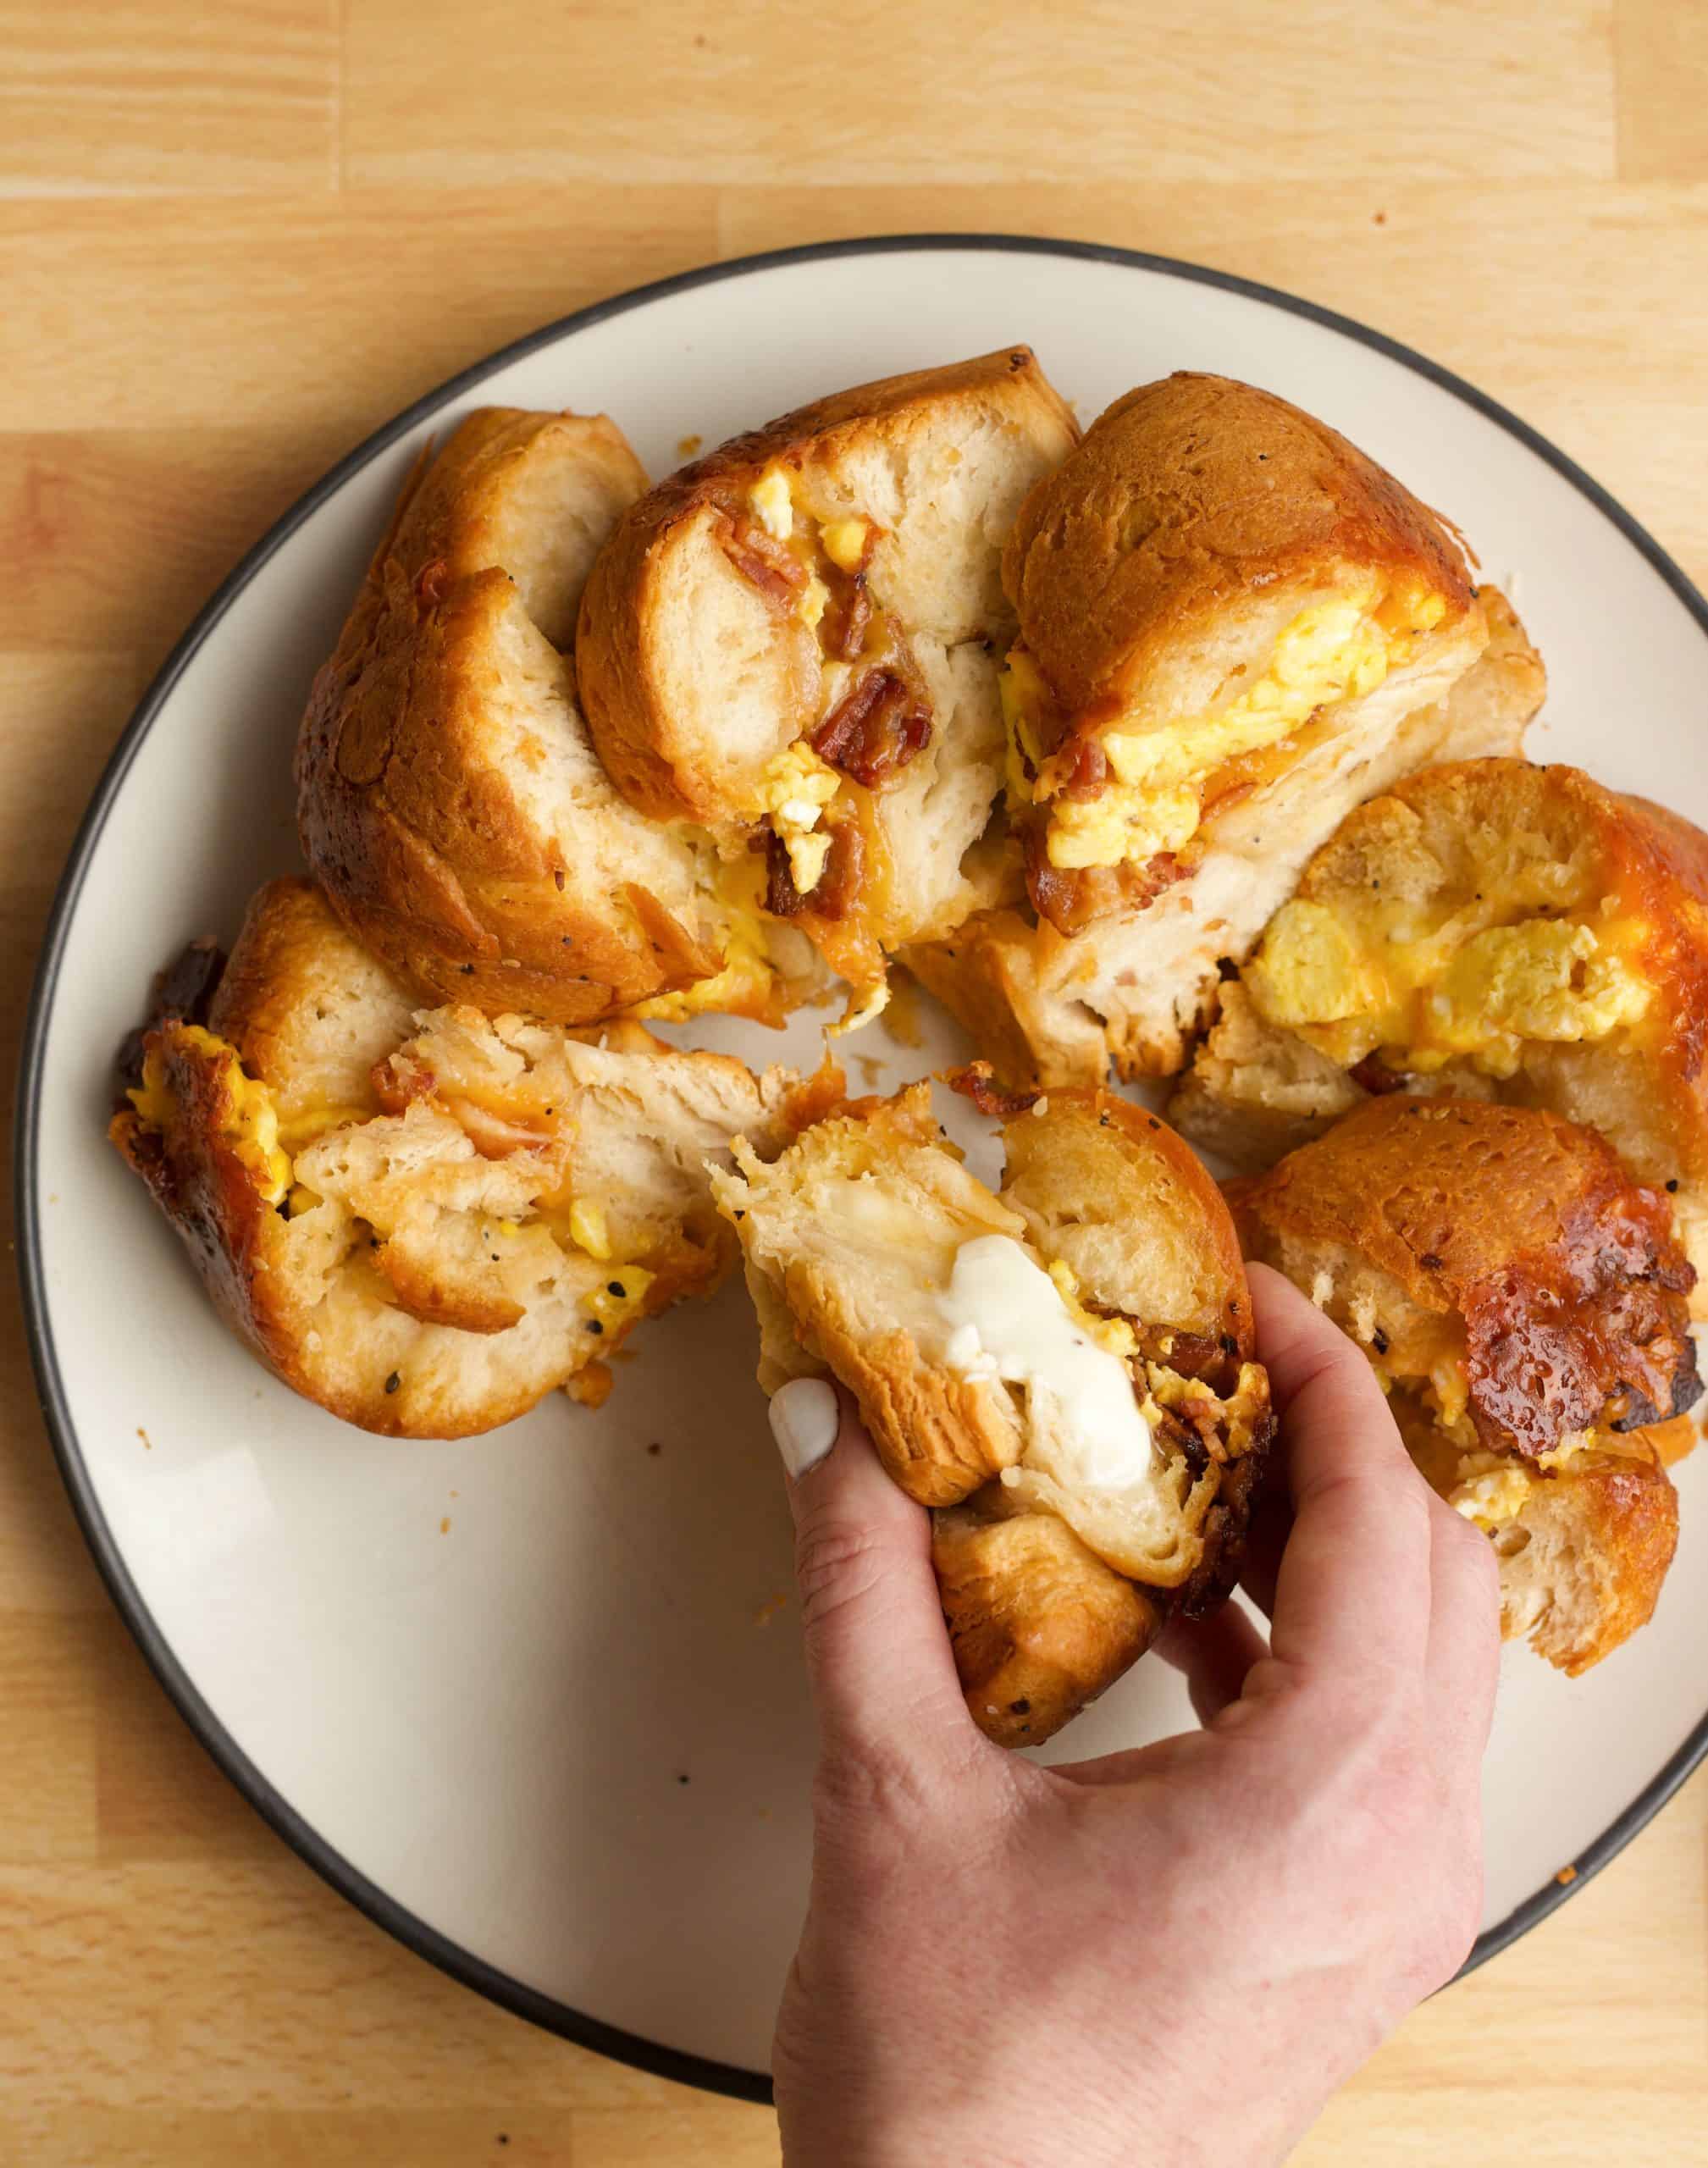 https://deliciousmadeeasy.com/wp-content/uploads/2019/03/Breakfast-Pull-Apart-Bread-2-scaled.jpg